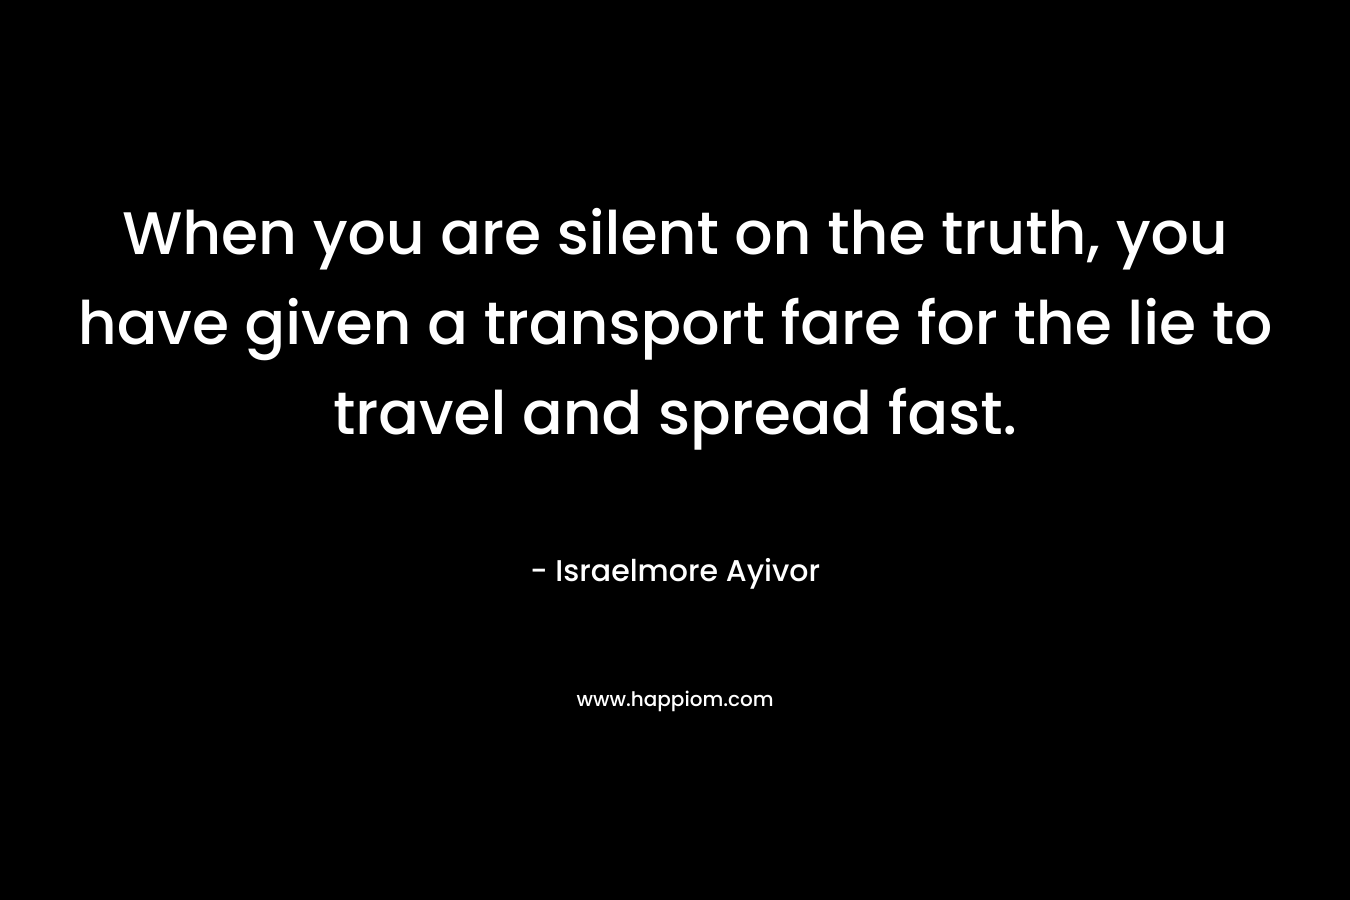 When you are silent on the truth, you have given a transport fare for the lie to travel and spread fast. – Israelmore Ayivor